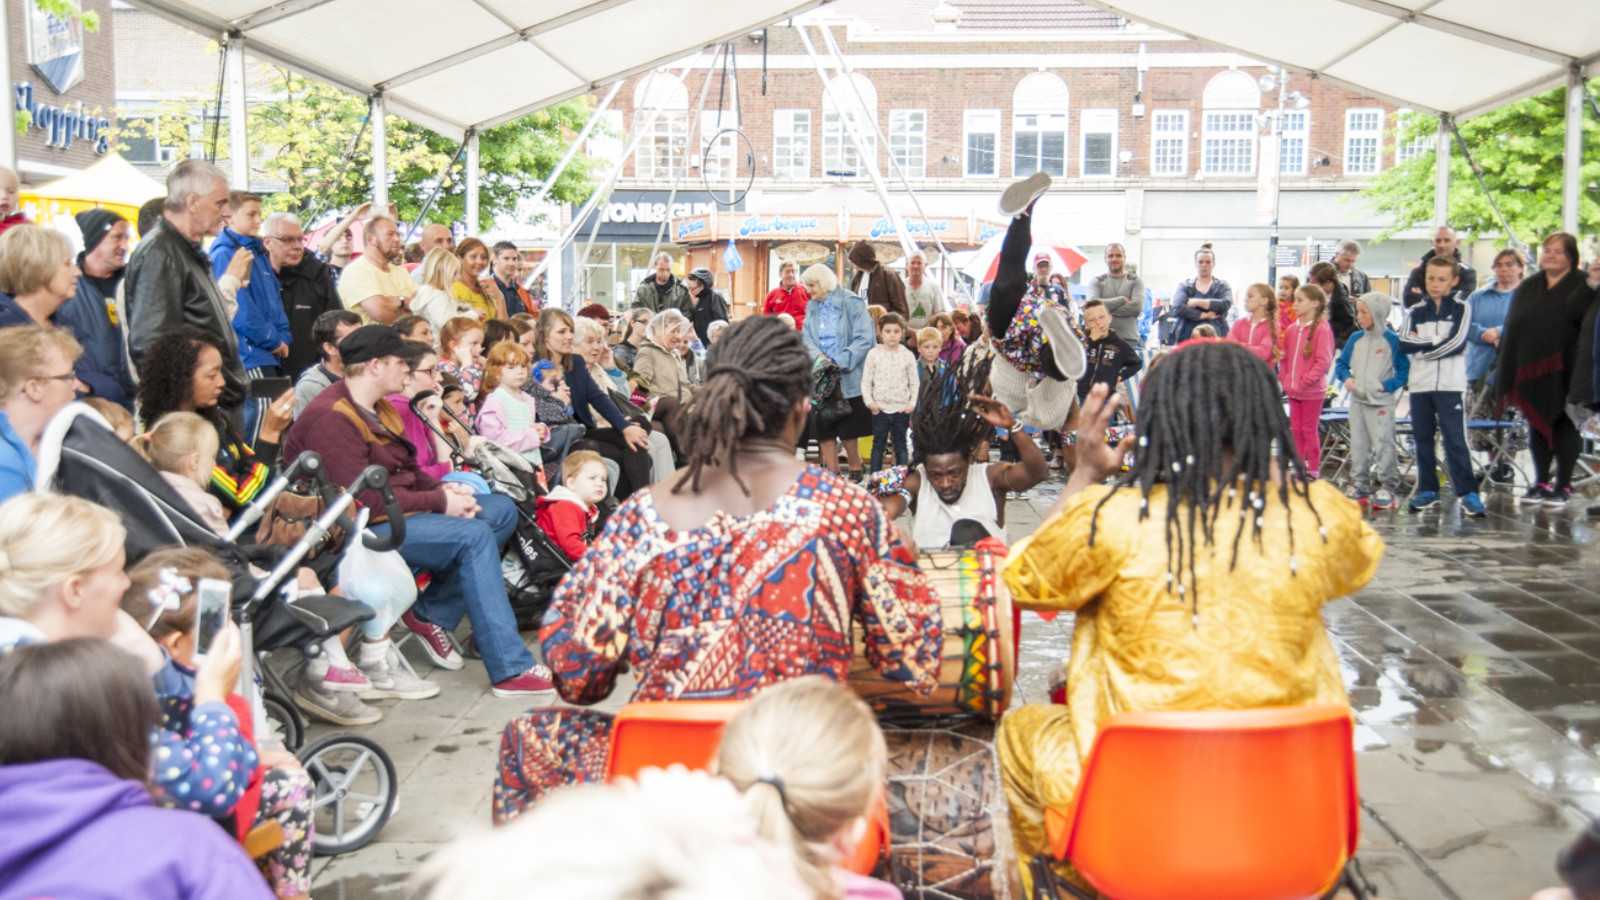 An audience of people sit and stand under a large gazebo in the middle of St Helens. Two people with dark, dreadlocked hair sit in orange seats ad play a pair of African drums while two people dance in front of them.